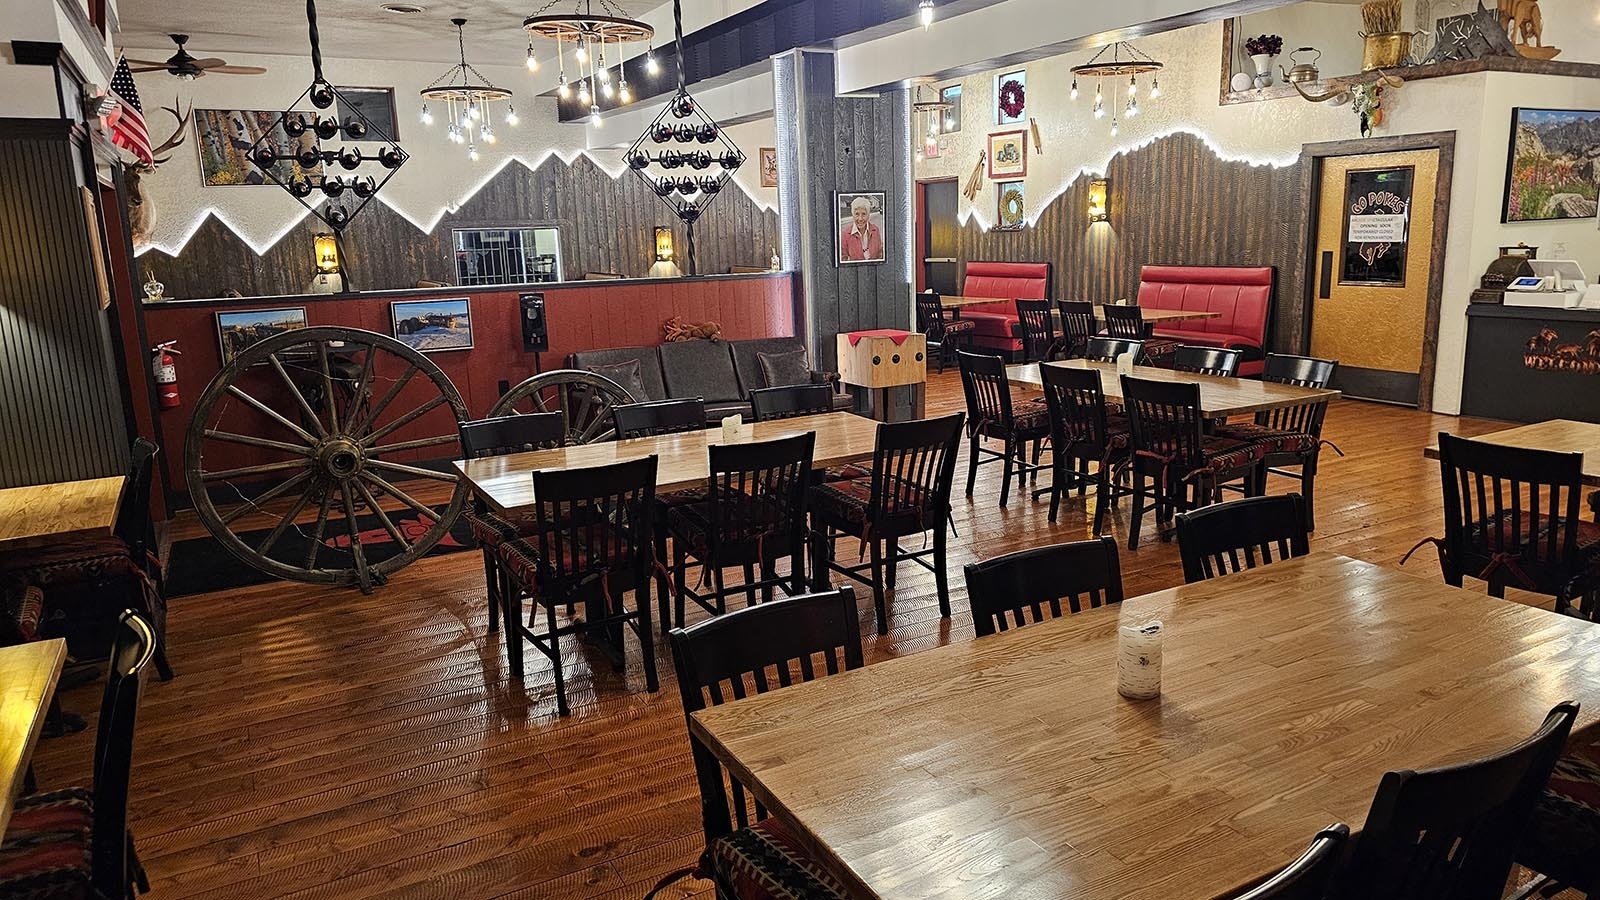 The restaurant's walls are decorated with mountains crafted from wood. The far wall to the right in particular depicts one of Buck Buchenroth's favorite mountains to climb.